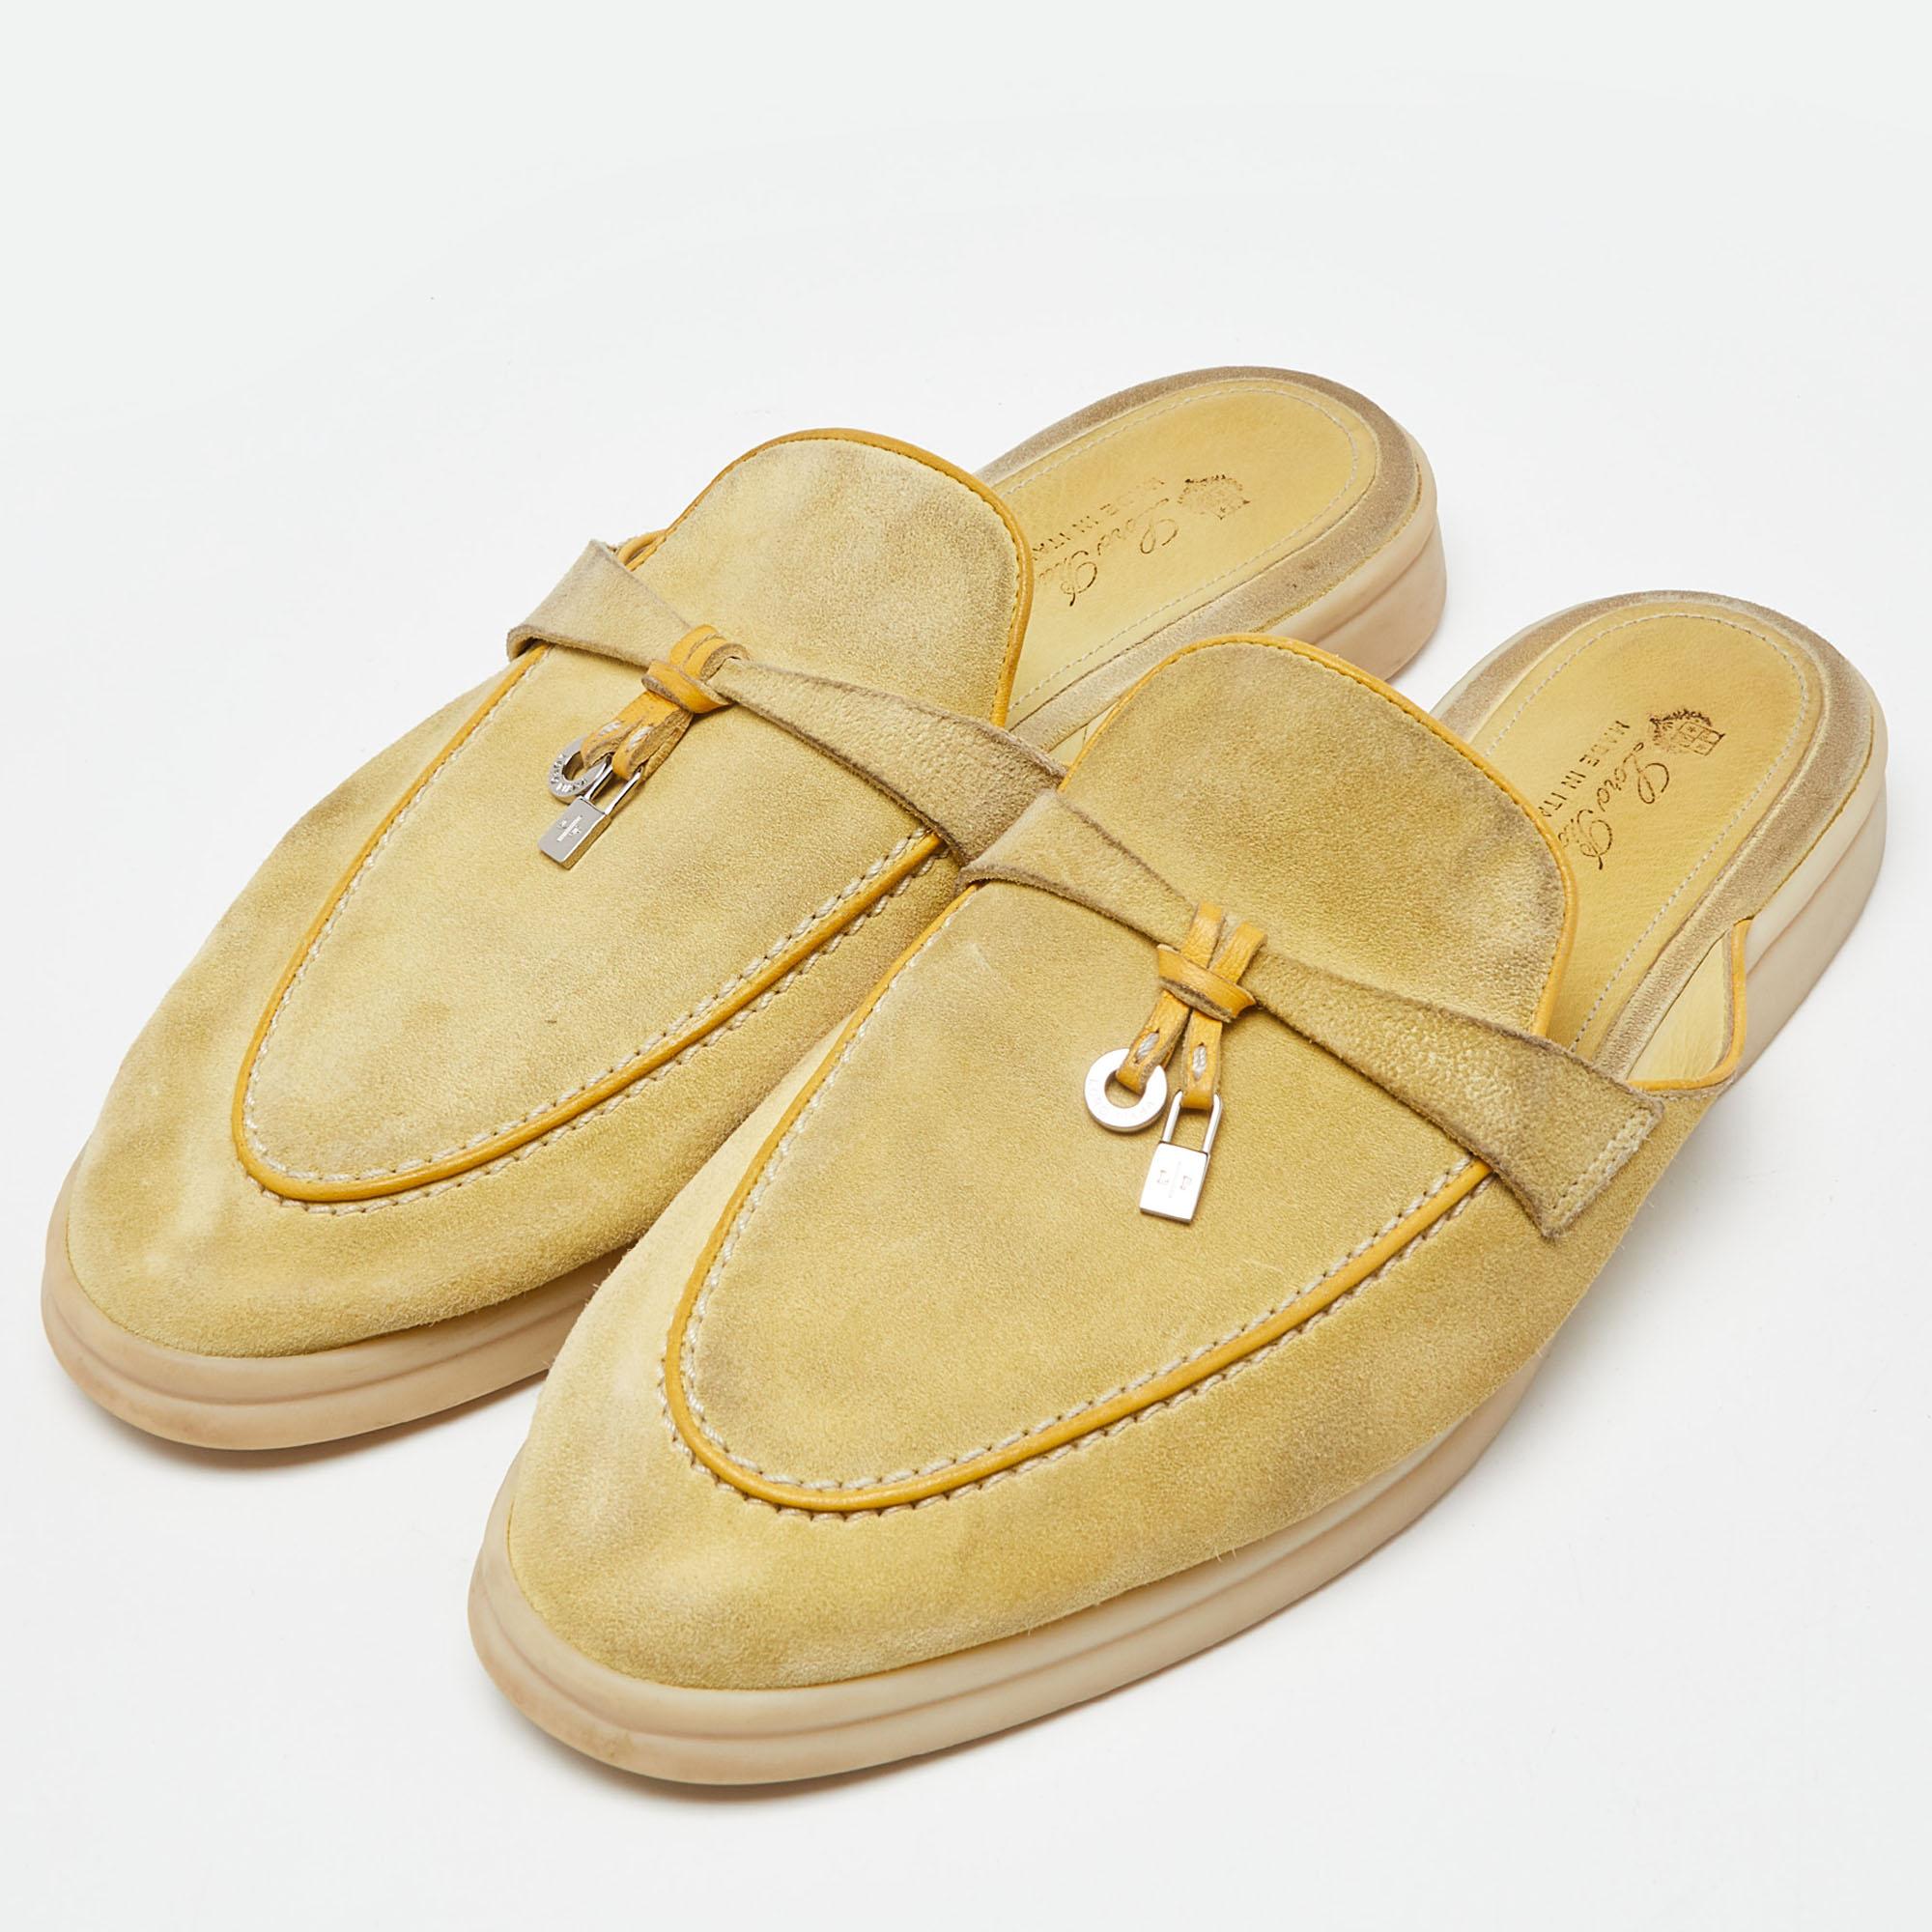 Crafted by Loro Piana, these Babouche Charms Walk Sandals embody understated elegance. Meticulously constructed from luxurious suede, they exude timeless charm. With delicate charms adorning the straps, they offer a touch of refinement to any